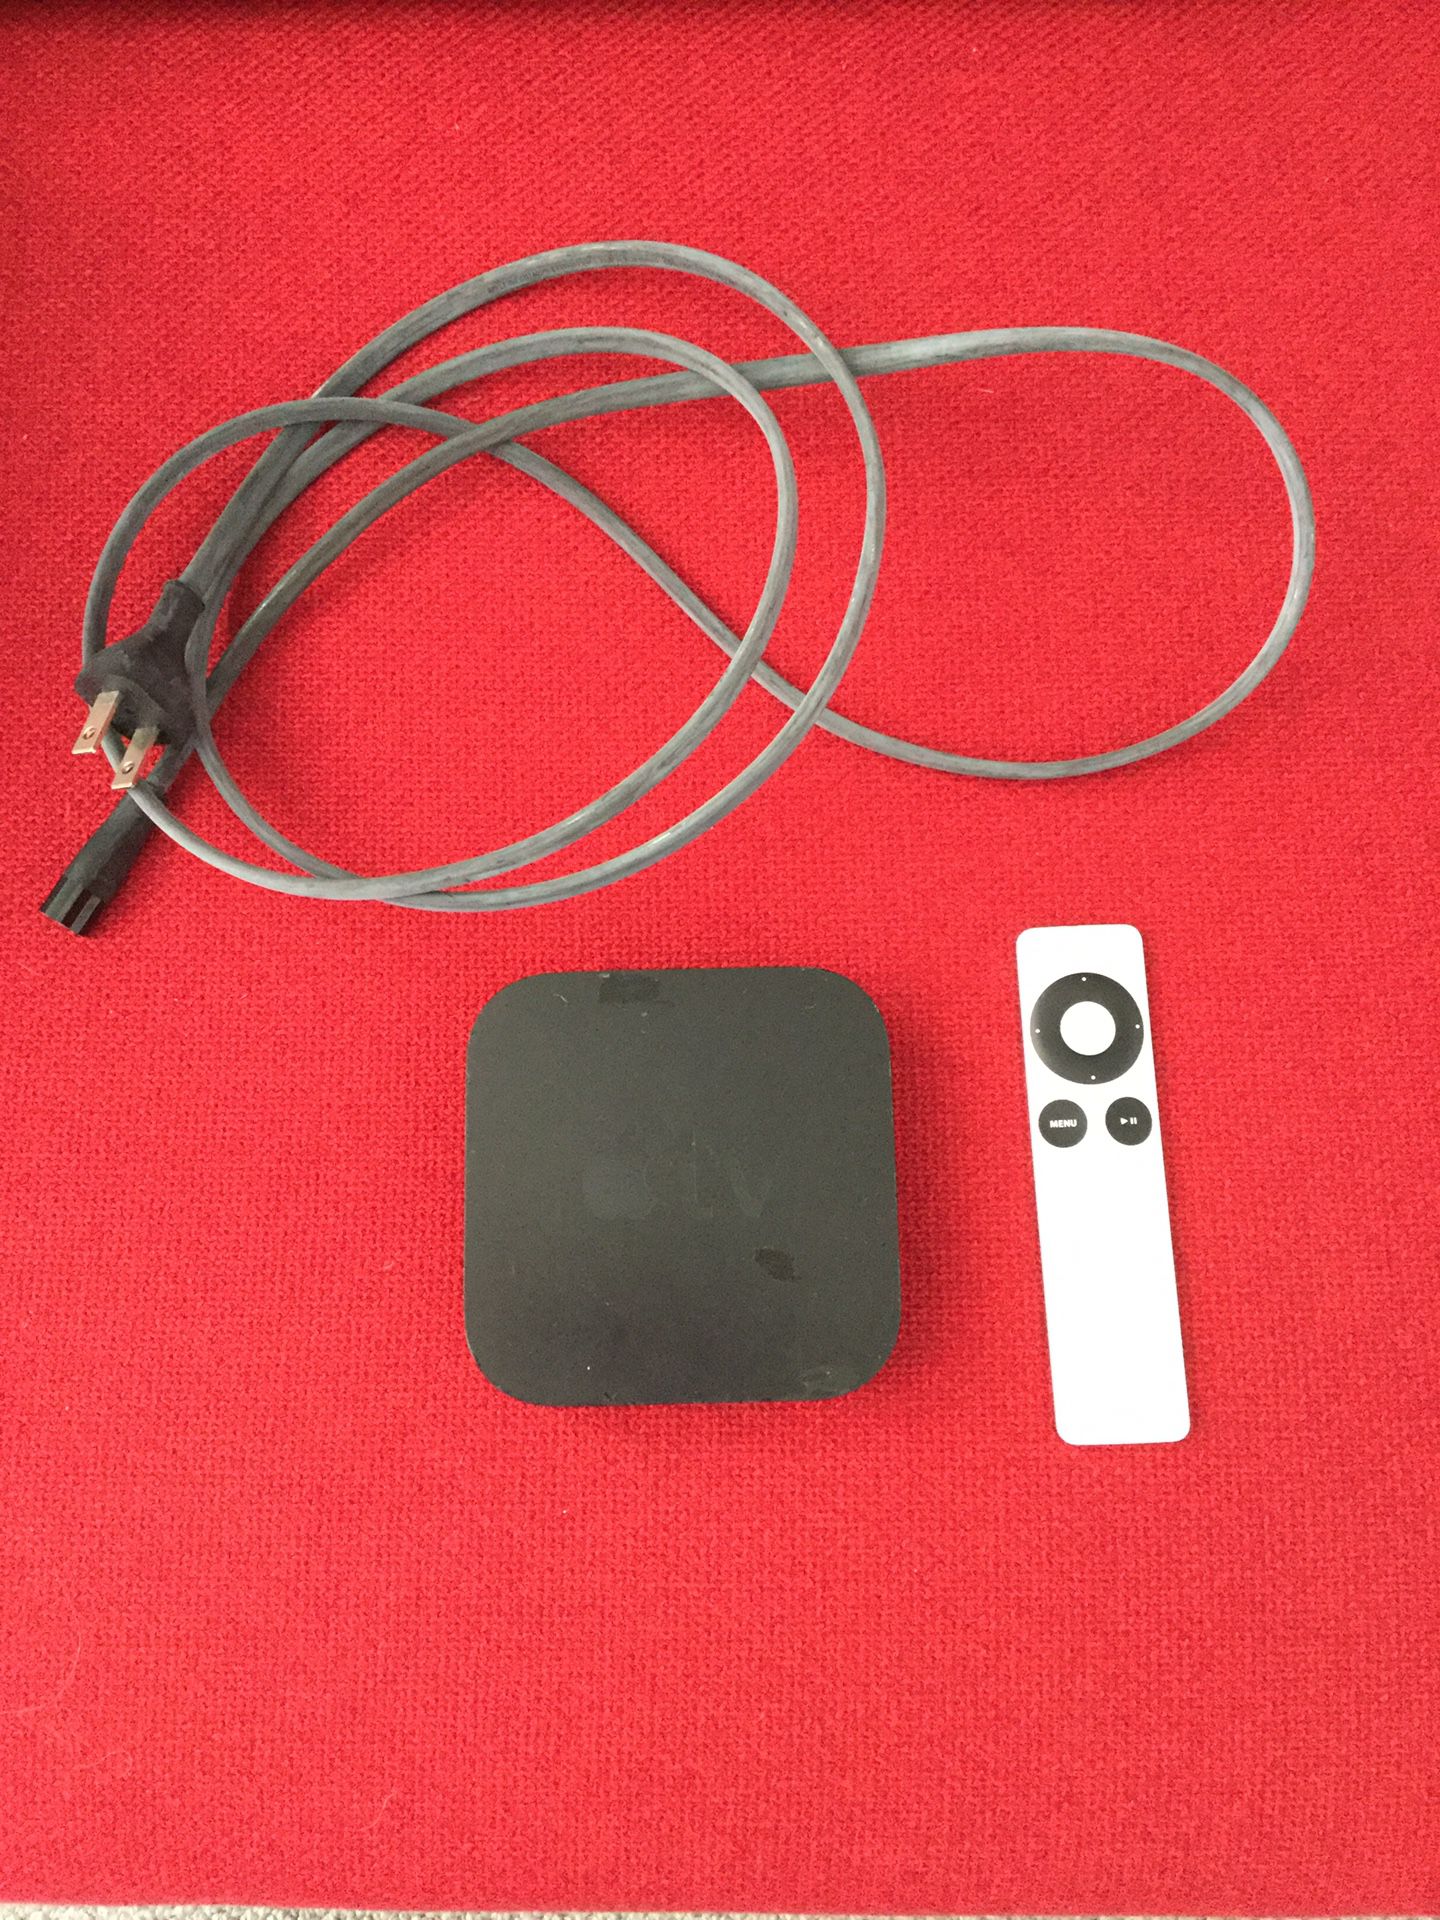 APPLE TV 3rd Generation Gen3 A1427 + remote + power cord - Works Great!